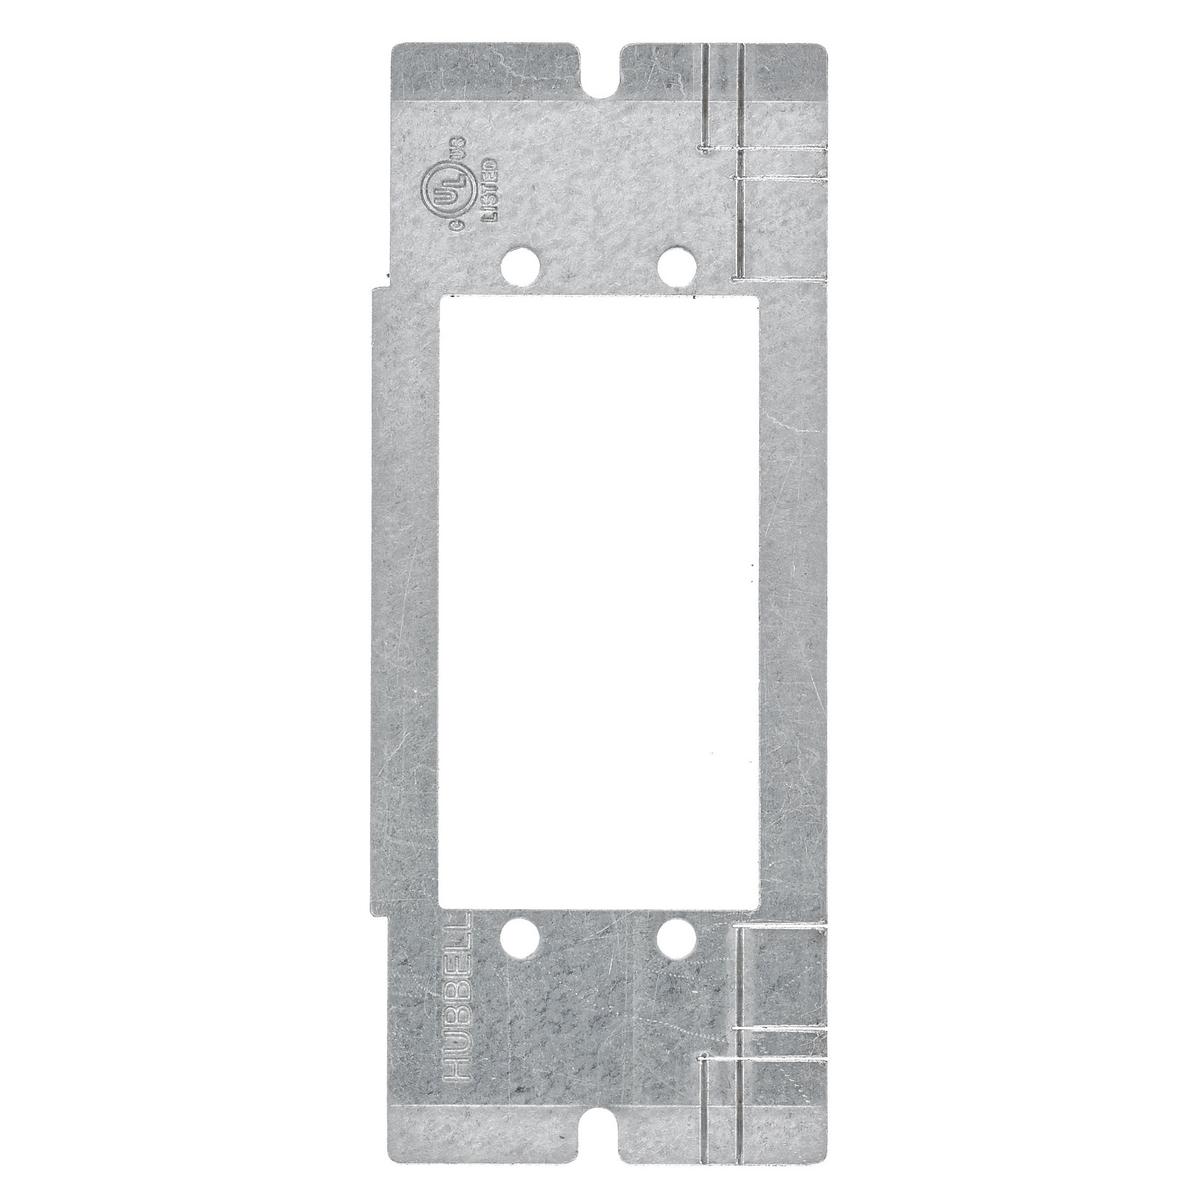 Hubbell FBMPAAP Concrete, Access, Wood Floorboxes, Recessed, 2, 4, & 6-Gang Series, Mounting Plate, 1-Gang, Opening Accommodates (2) Extron® AAP Modules  ; Plate for Use in SystemOne 2, 4 & 6-Gang Recessed Floorboxes ; 1-Gang- (2) Extron® AAP Opening ; Horizontial 1-Gang